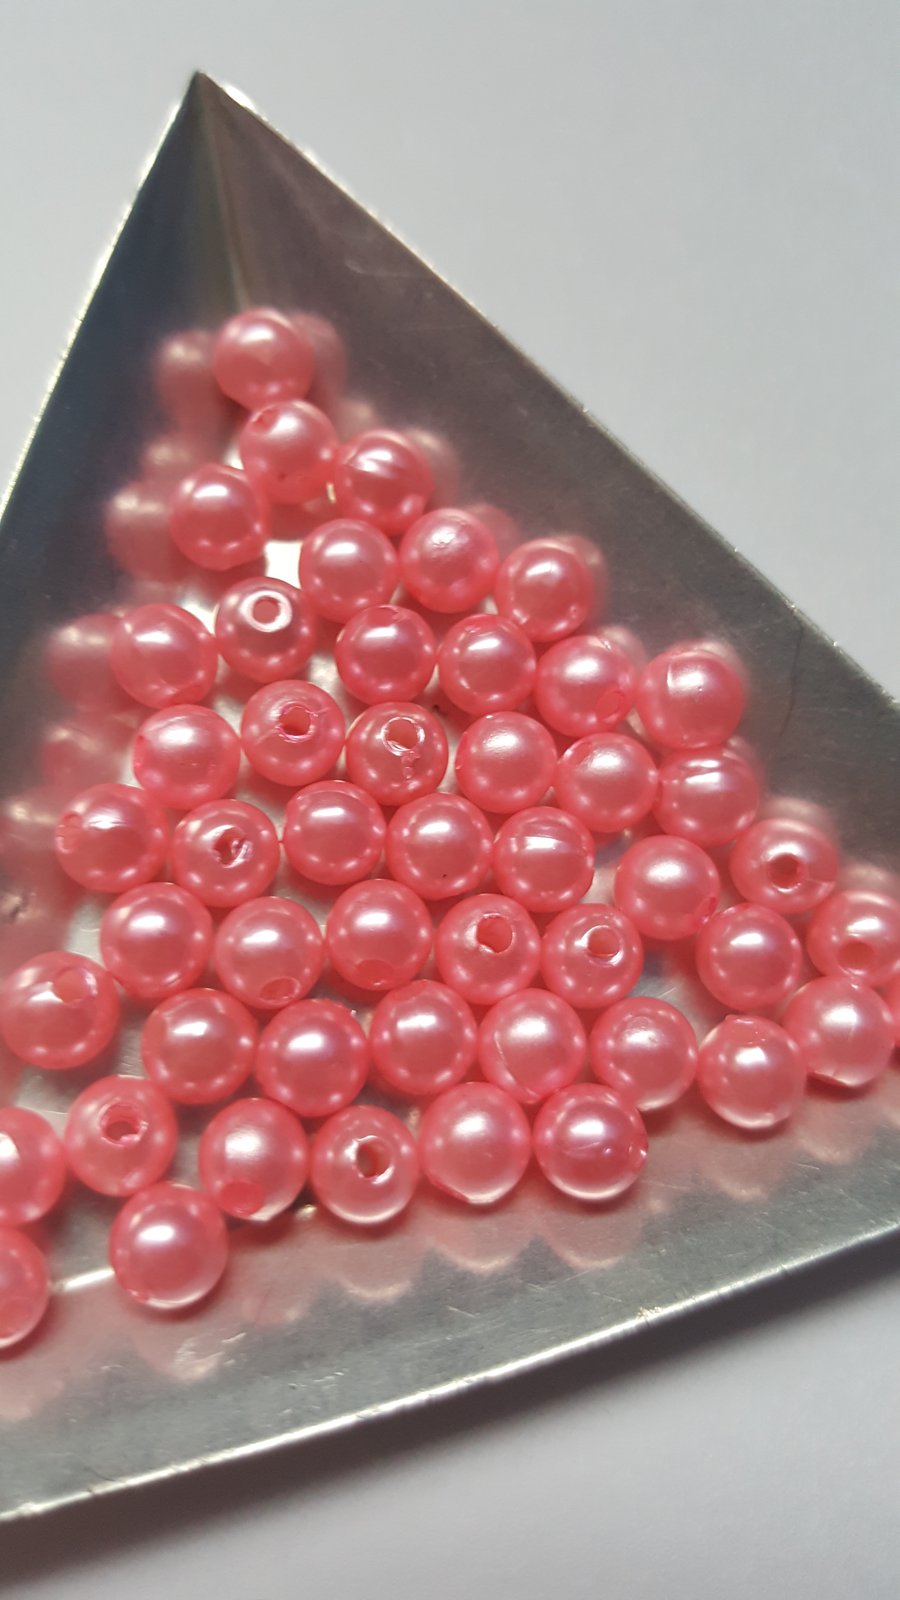 50 x Acrylic Pearl Beads - Round - 6mm - Pink 